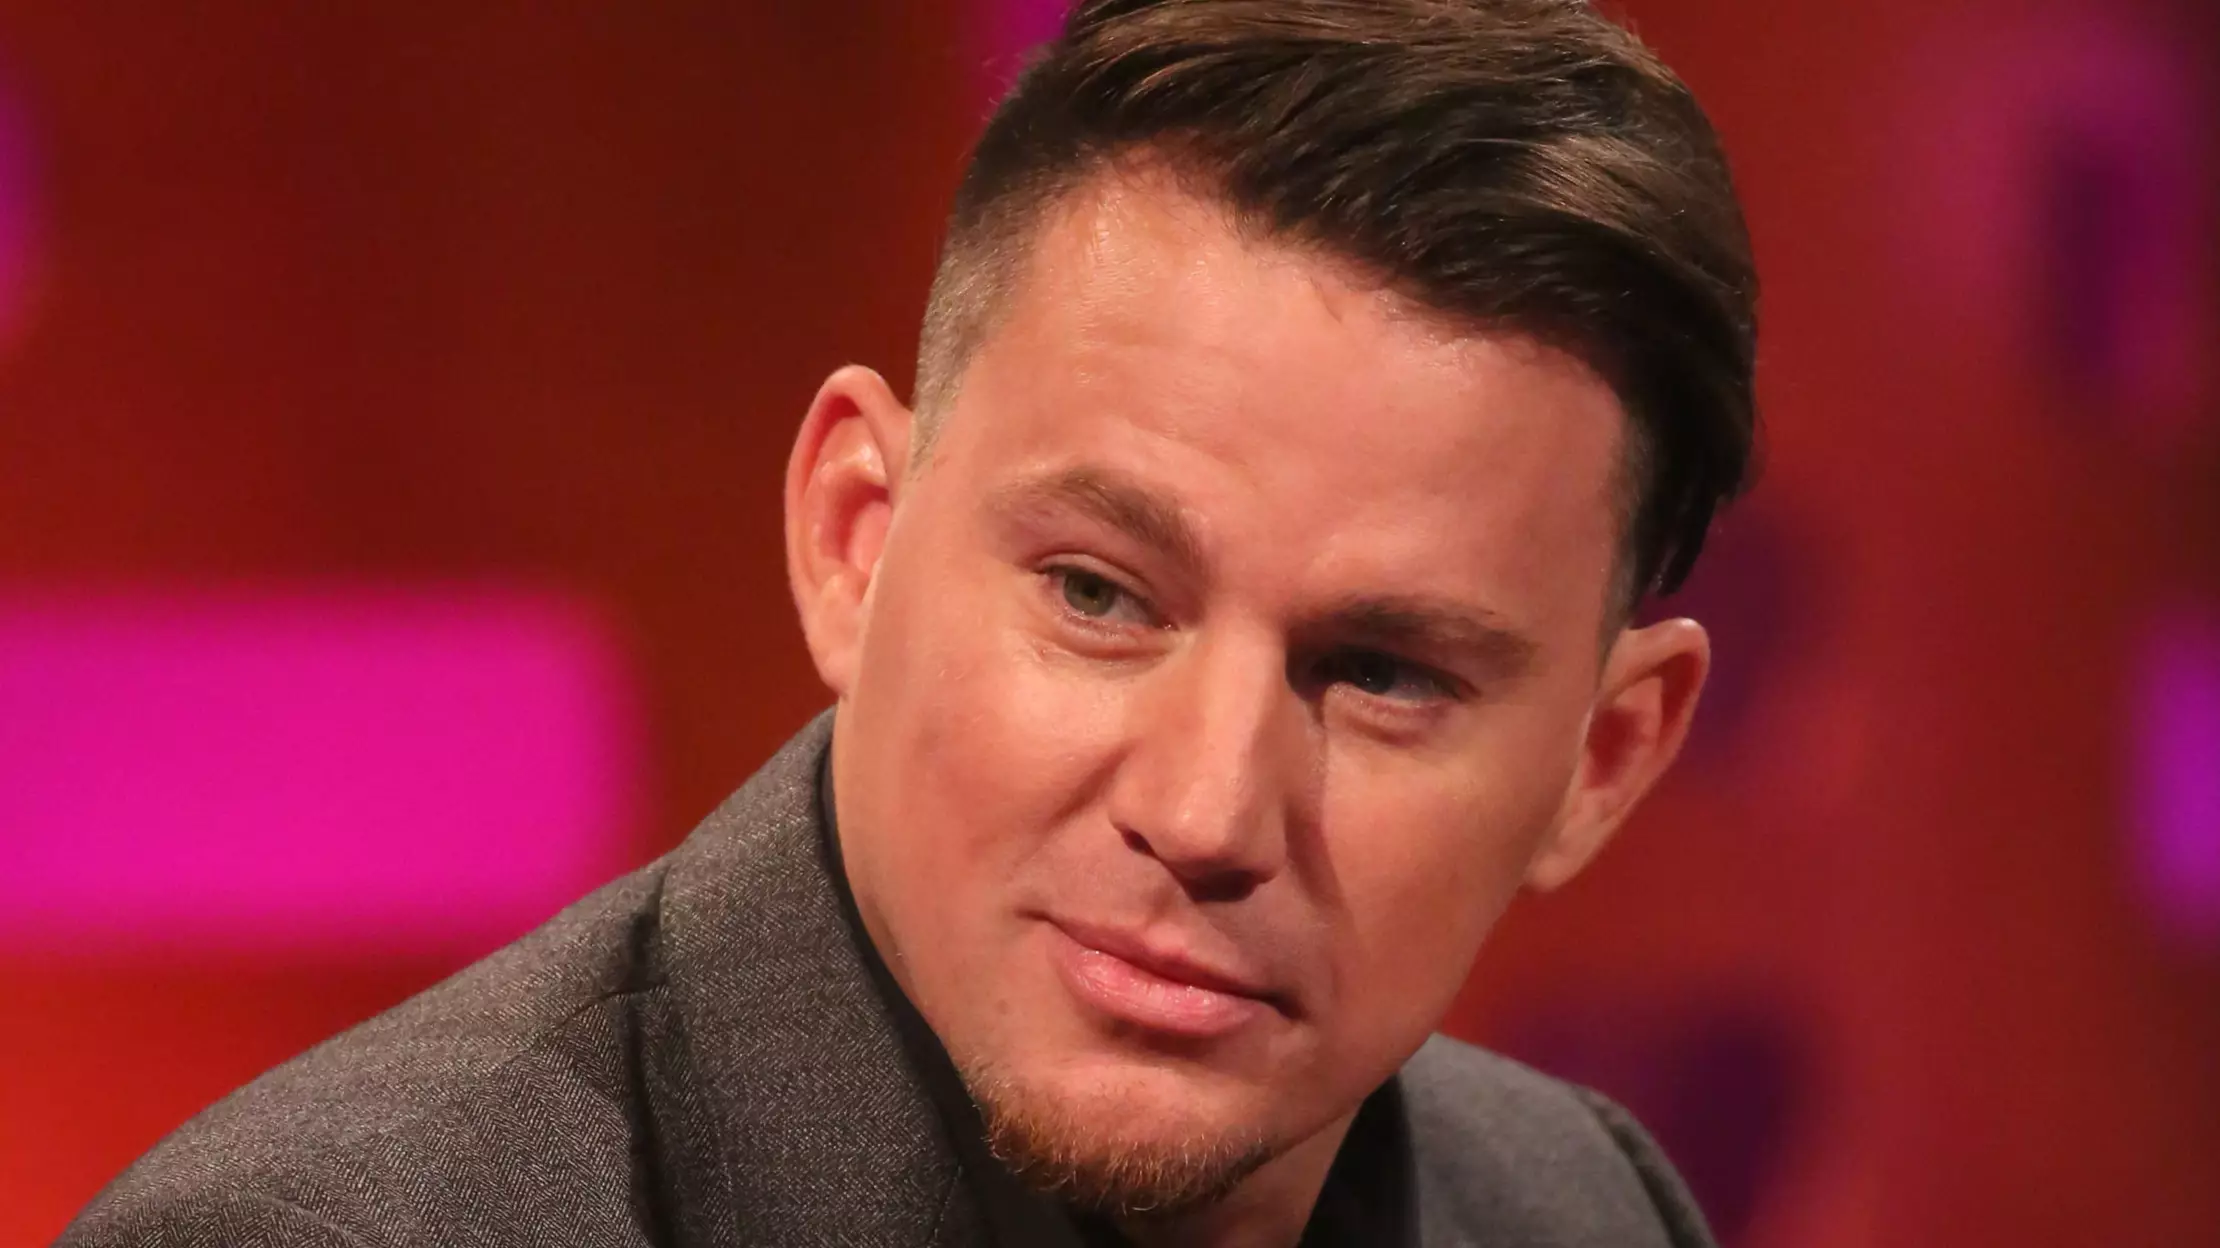 A Picture Of Channing Tatum's Ballsack Just Sold For Thousands